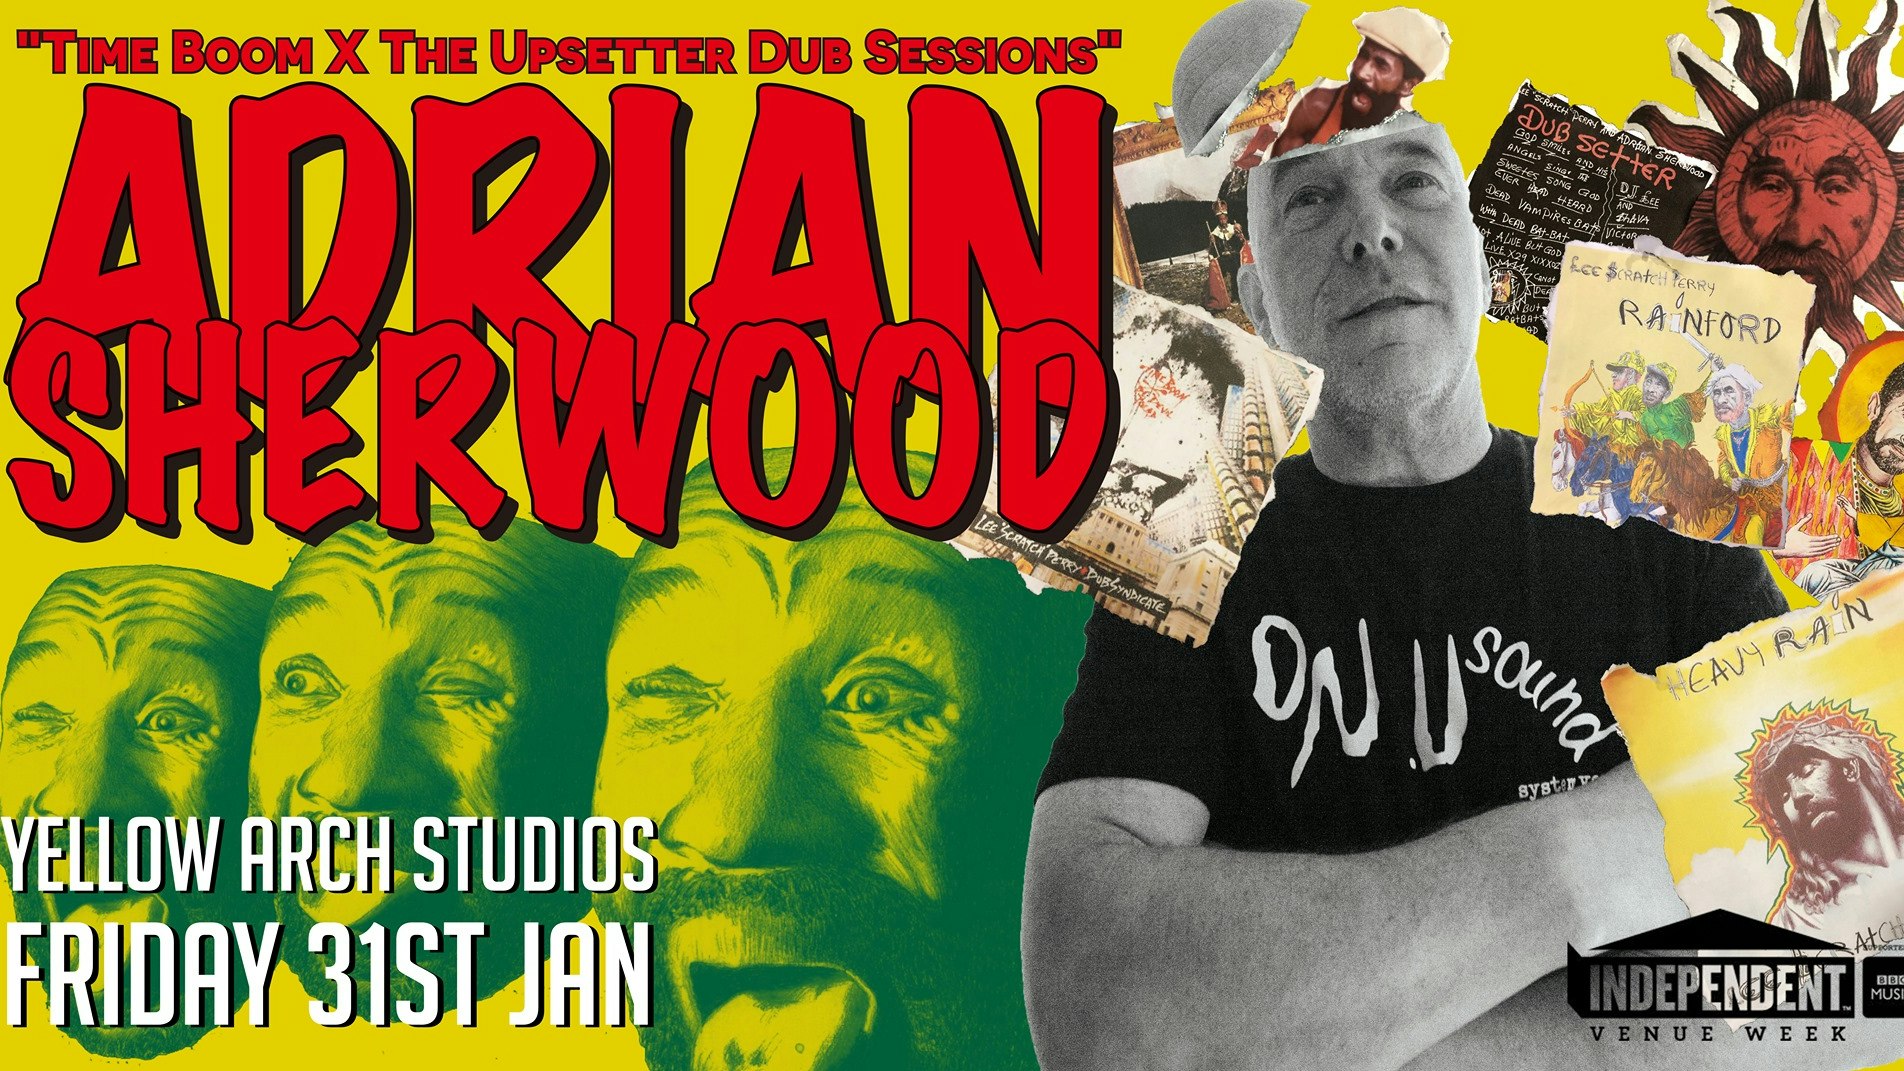 Adrian Sherwood ‘Time Boom x The Upsetter Dub Sessions’